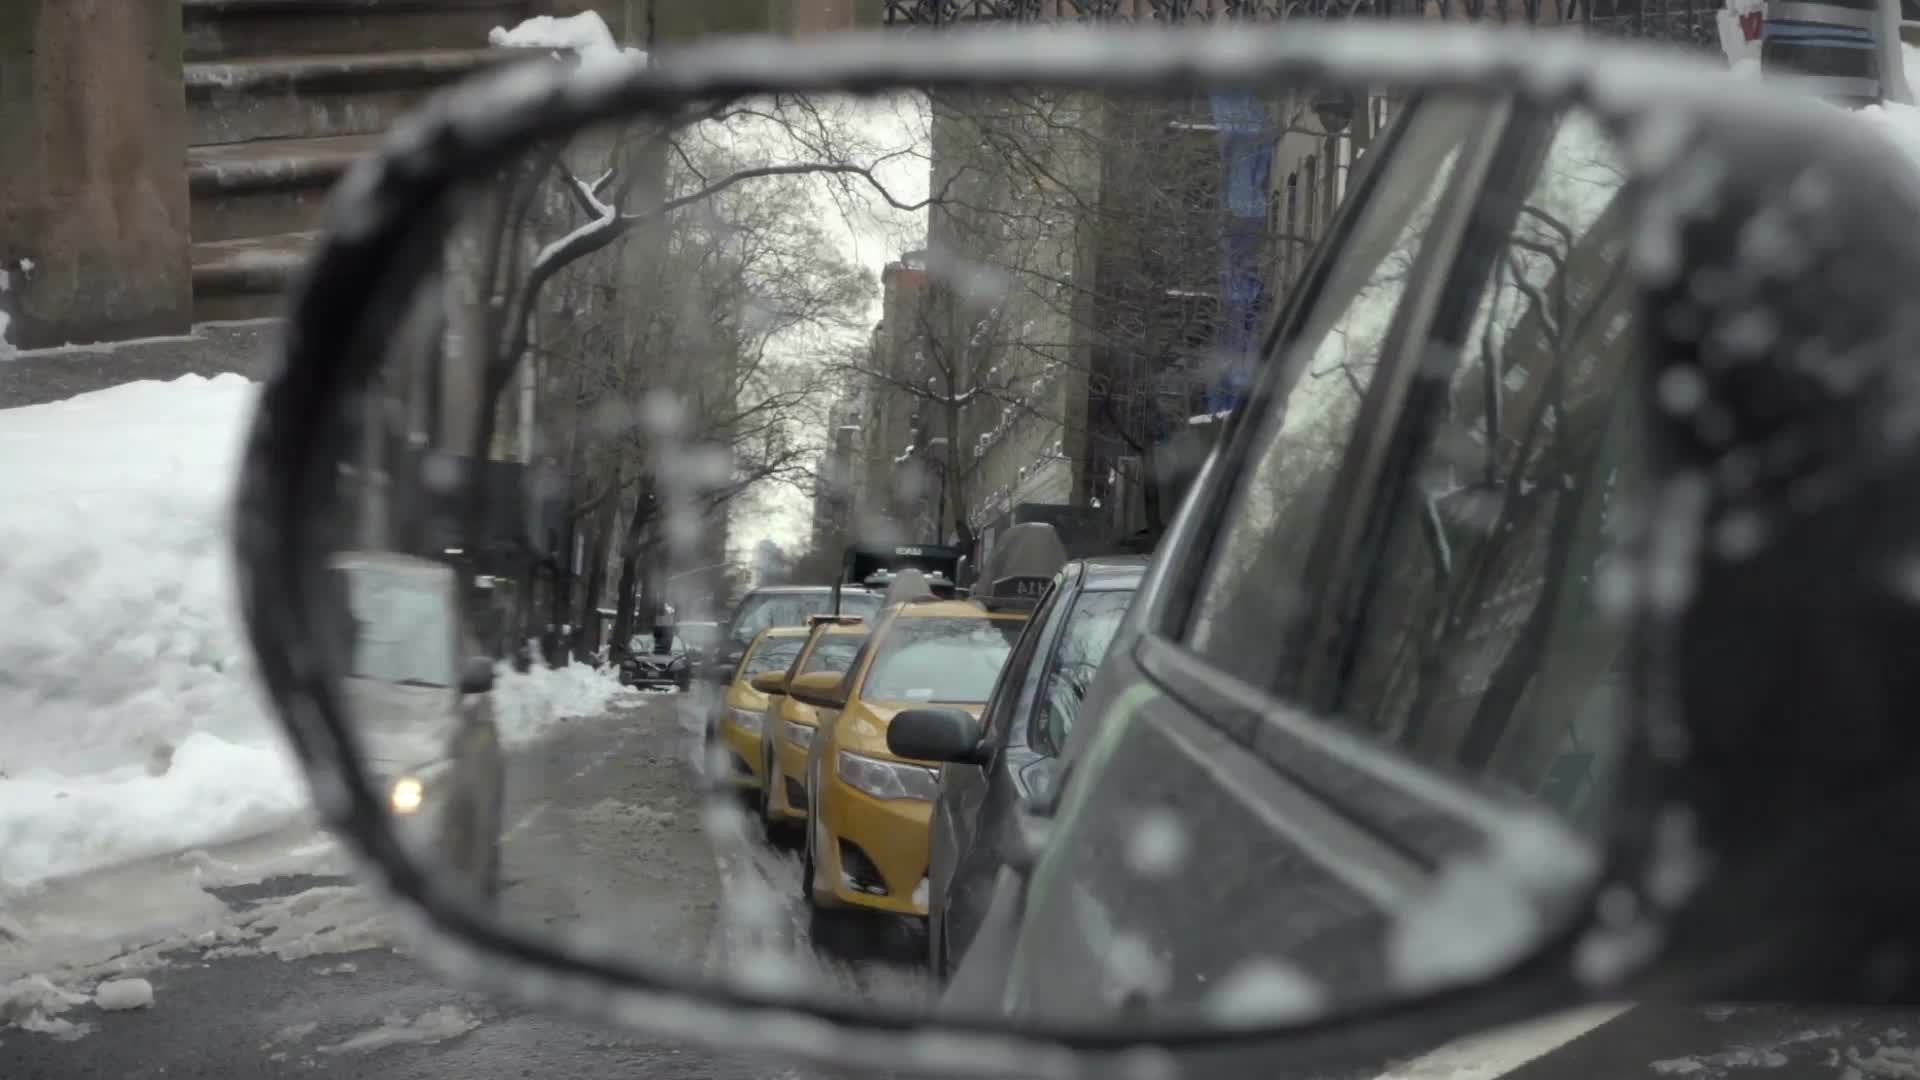 taxi cabs and cars in driver's side mirror while driving in slow motion on winter day with snow on ground in NYC